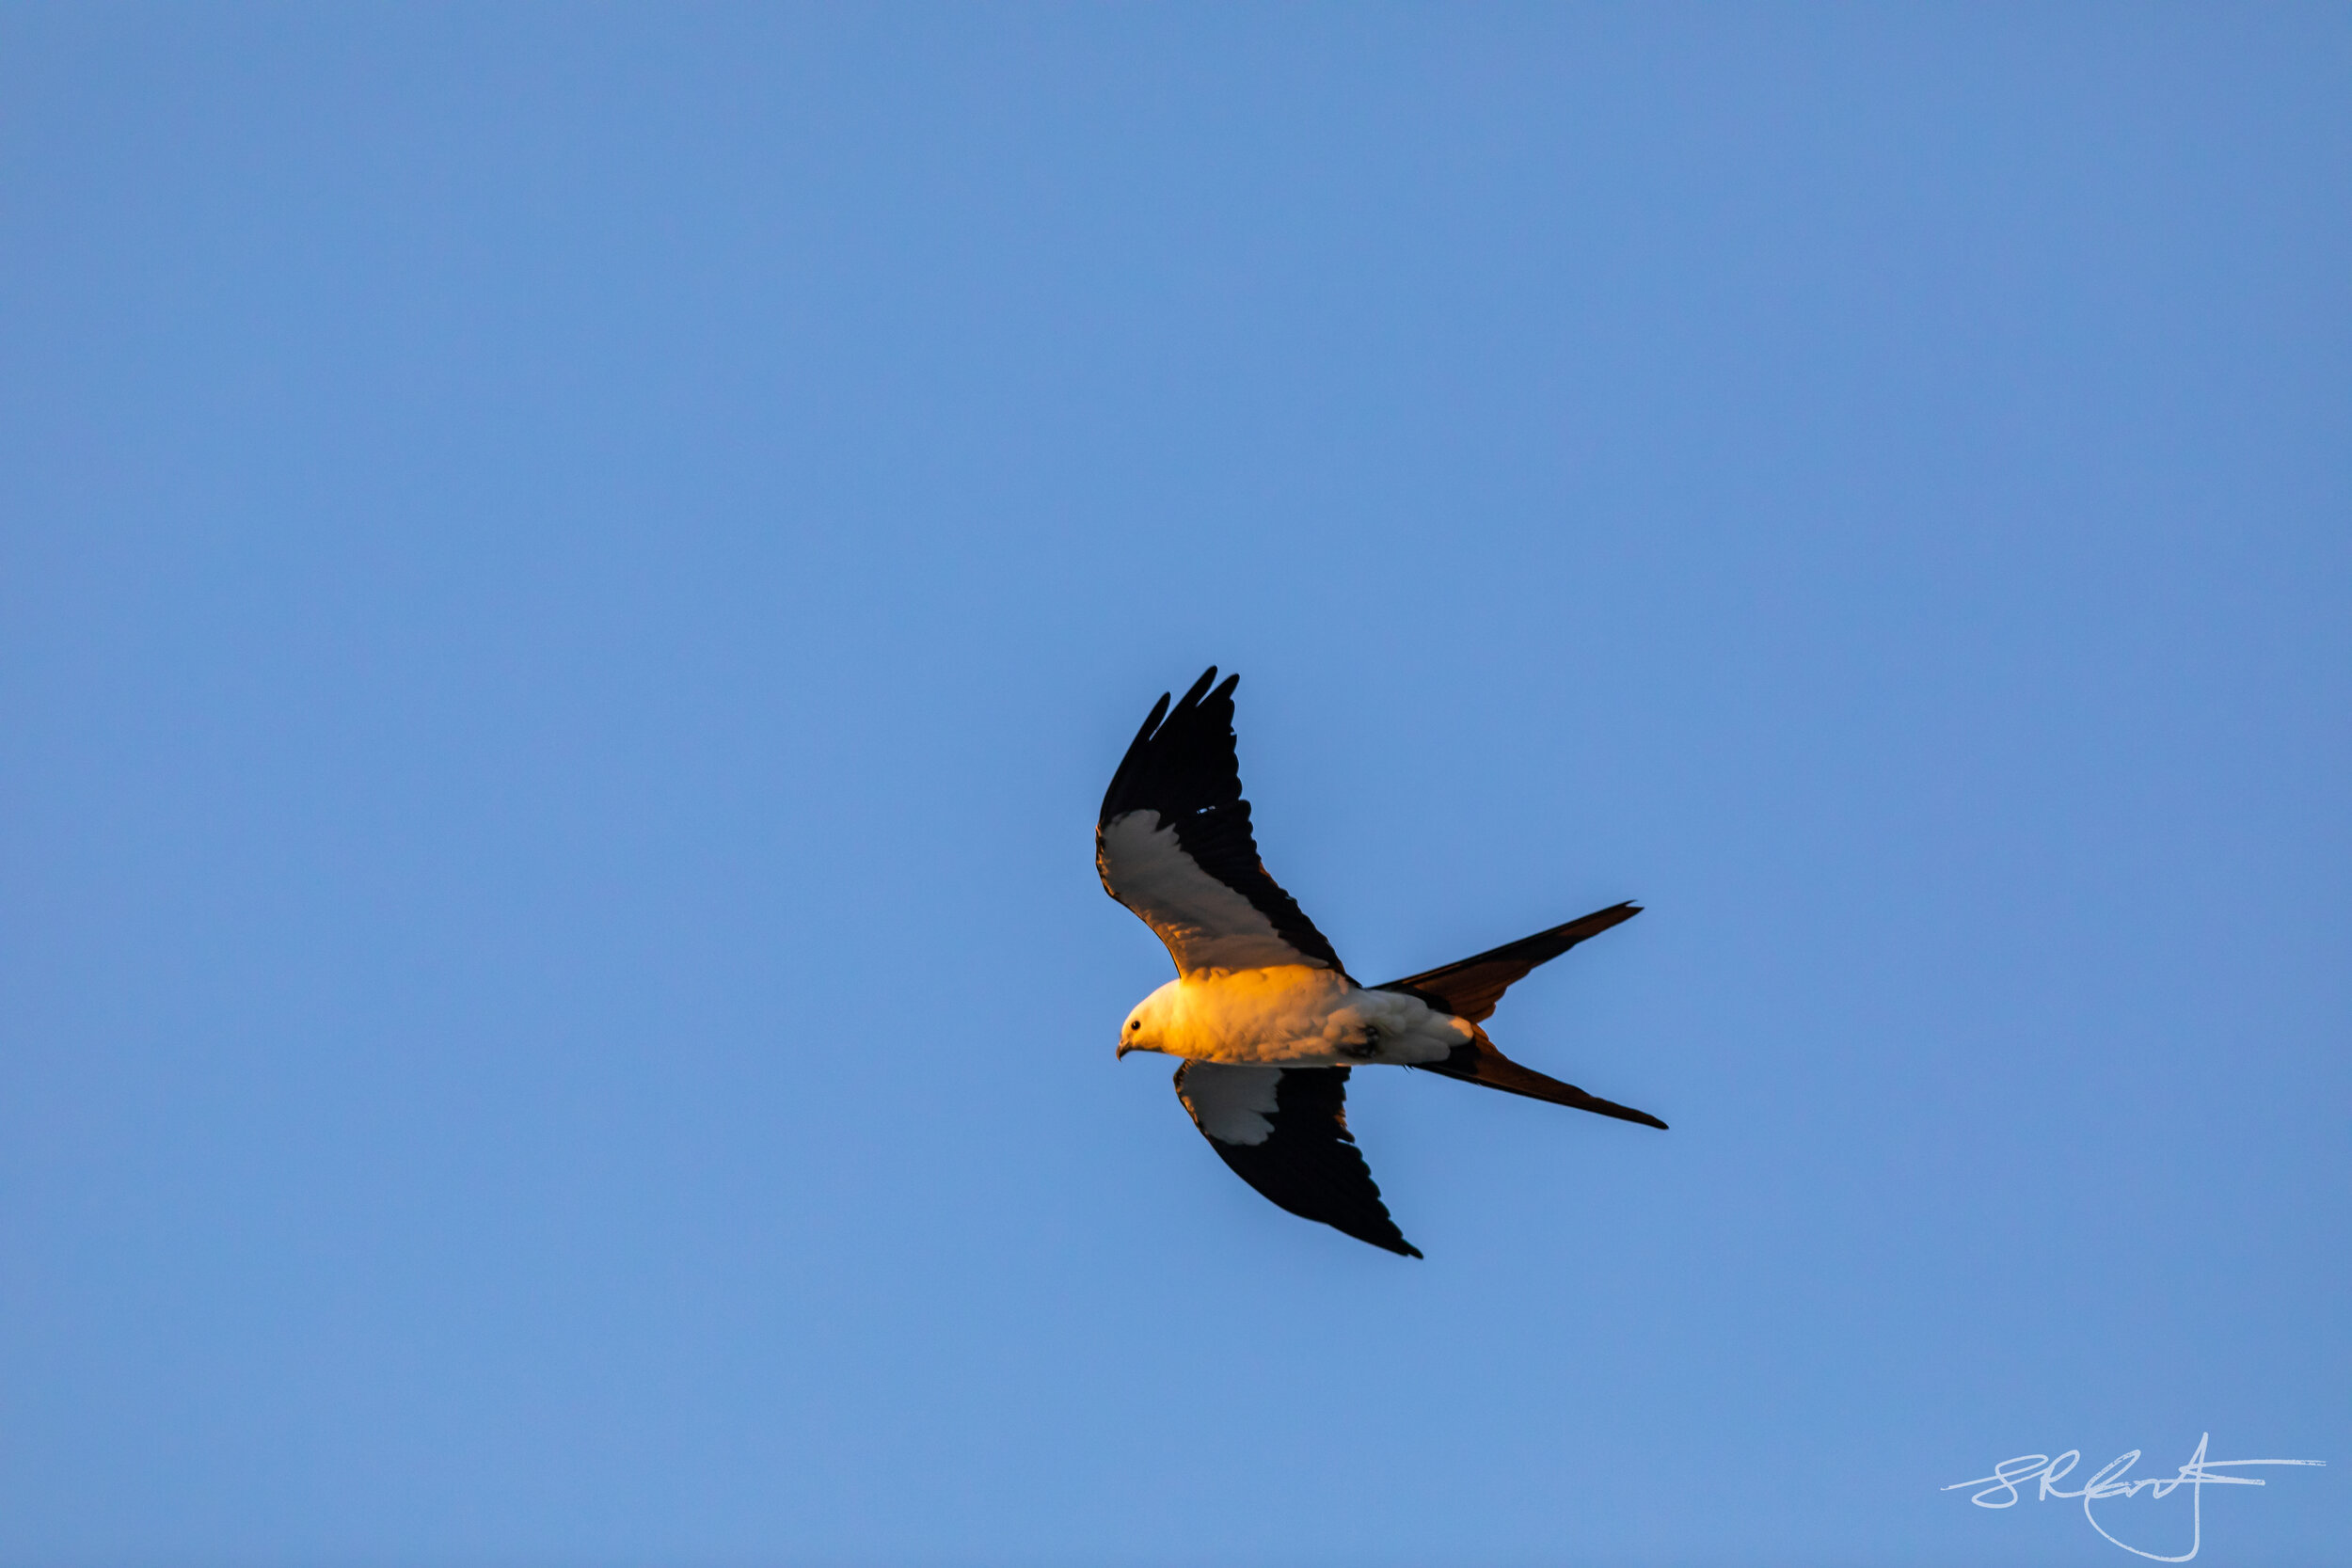 Swallow Tail Kite welcomes us to CREW.